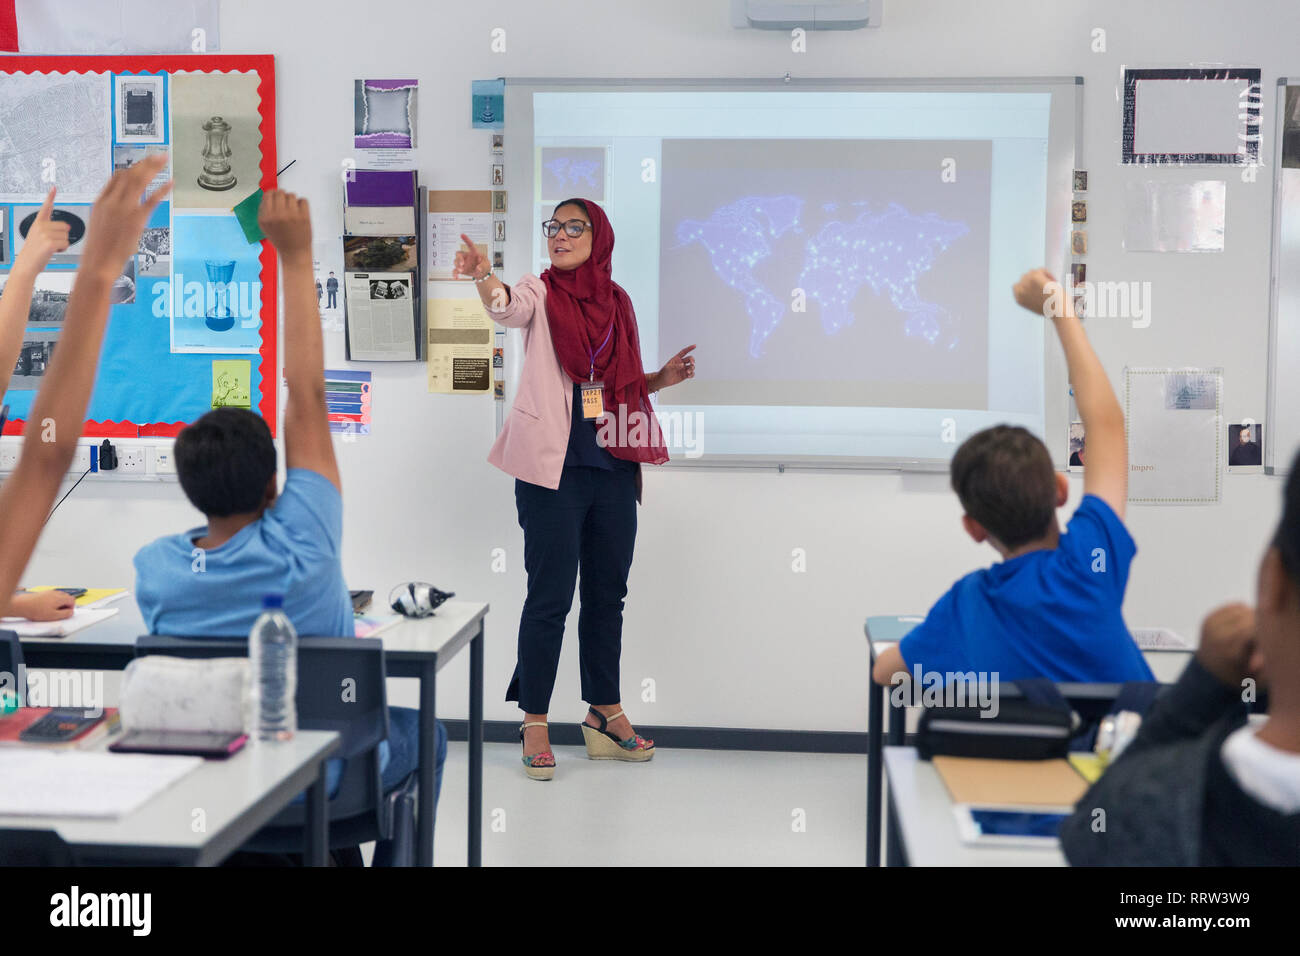 Female teacher in hijab leading lesson, calling on students in classroom Stock Photo